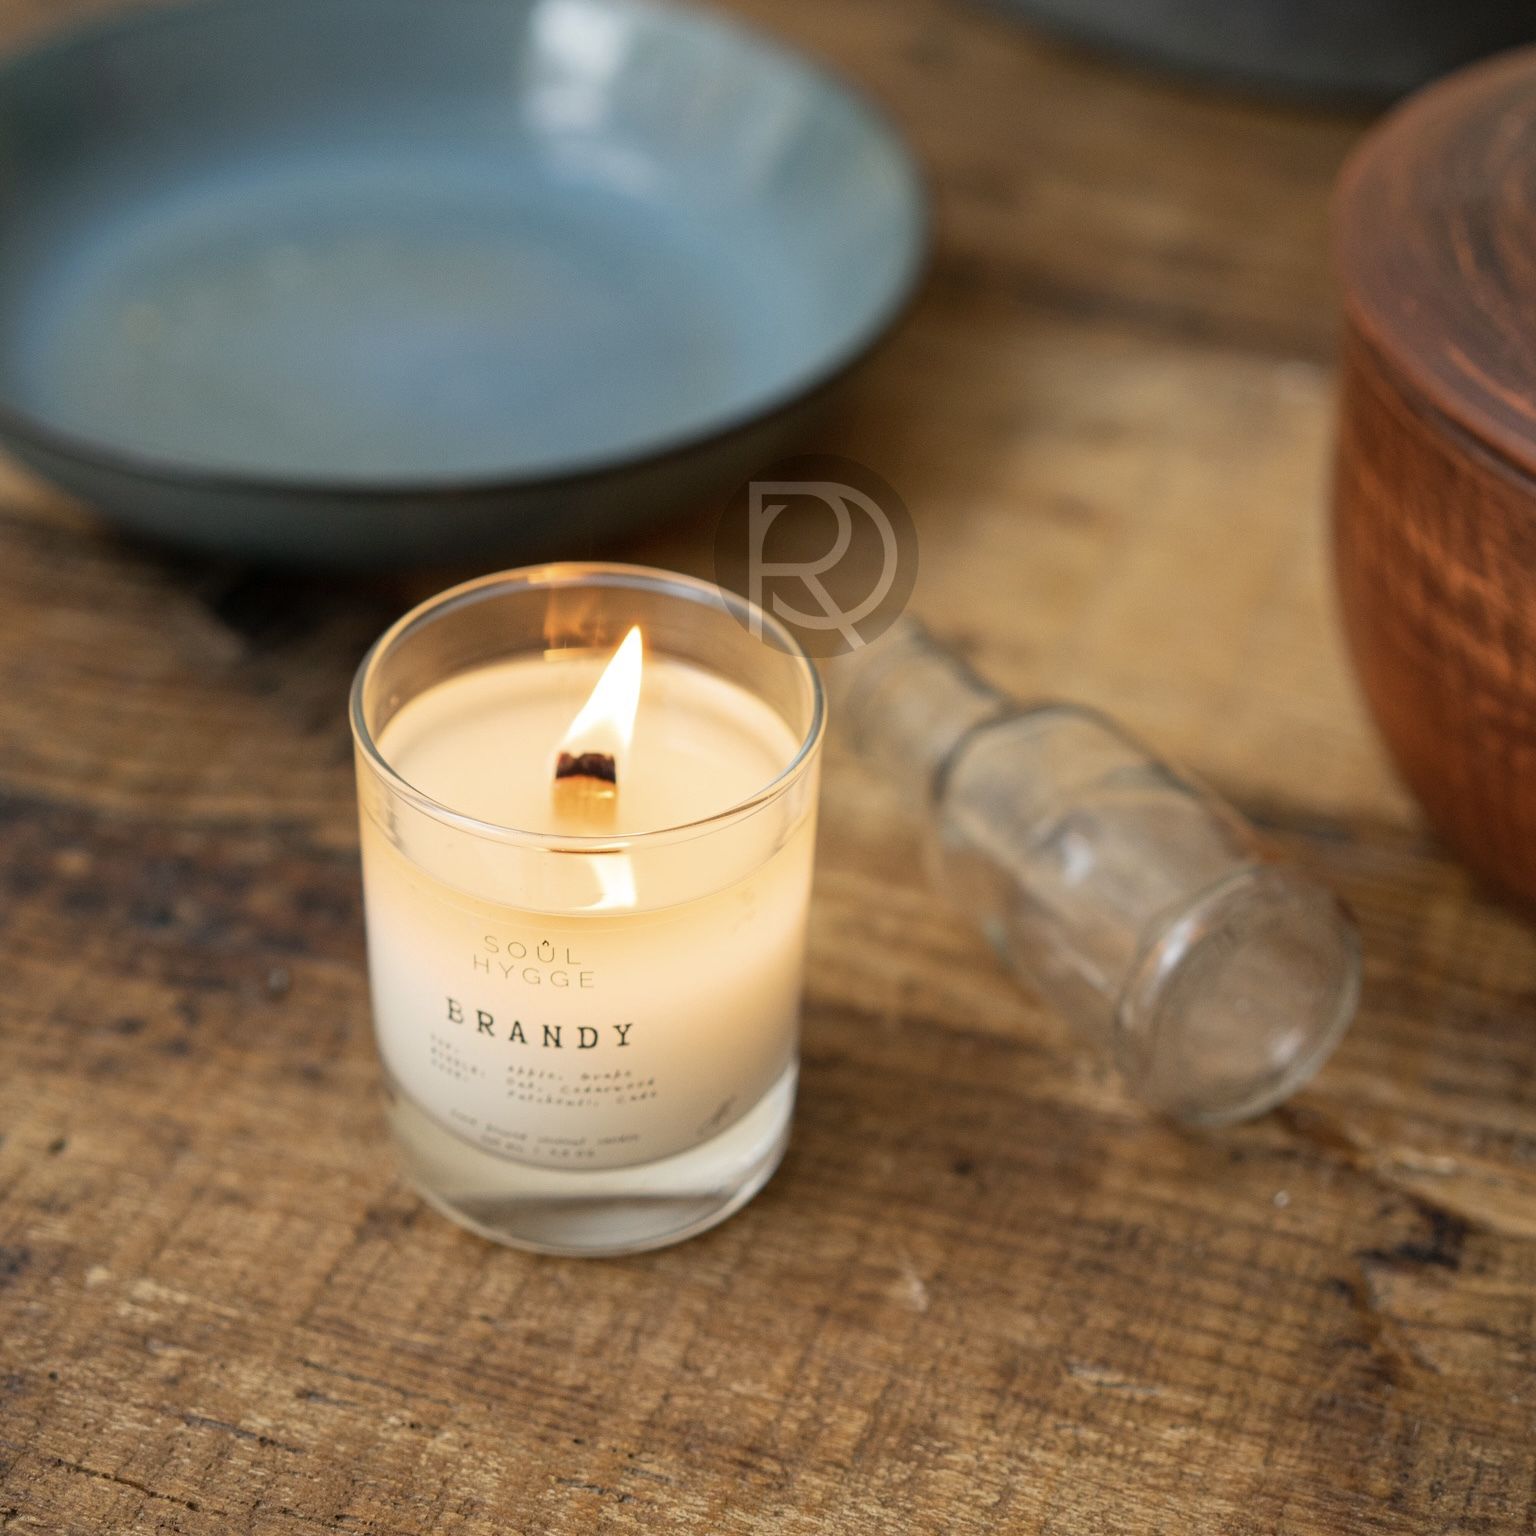 BRANDY by Romatti Scented Candle